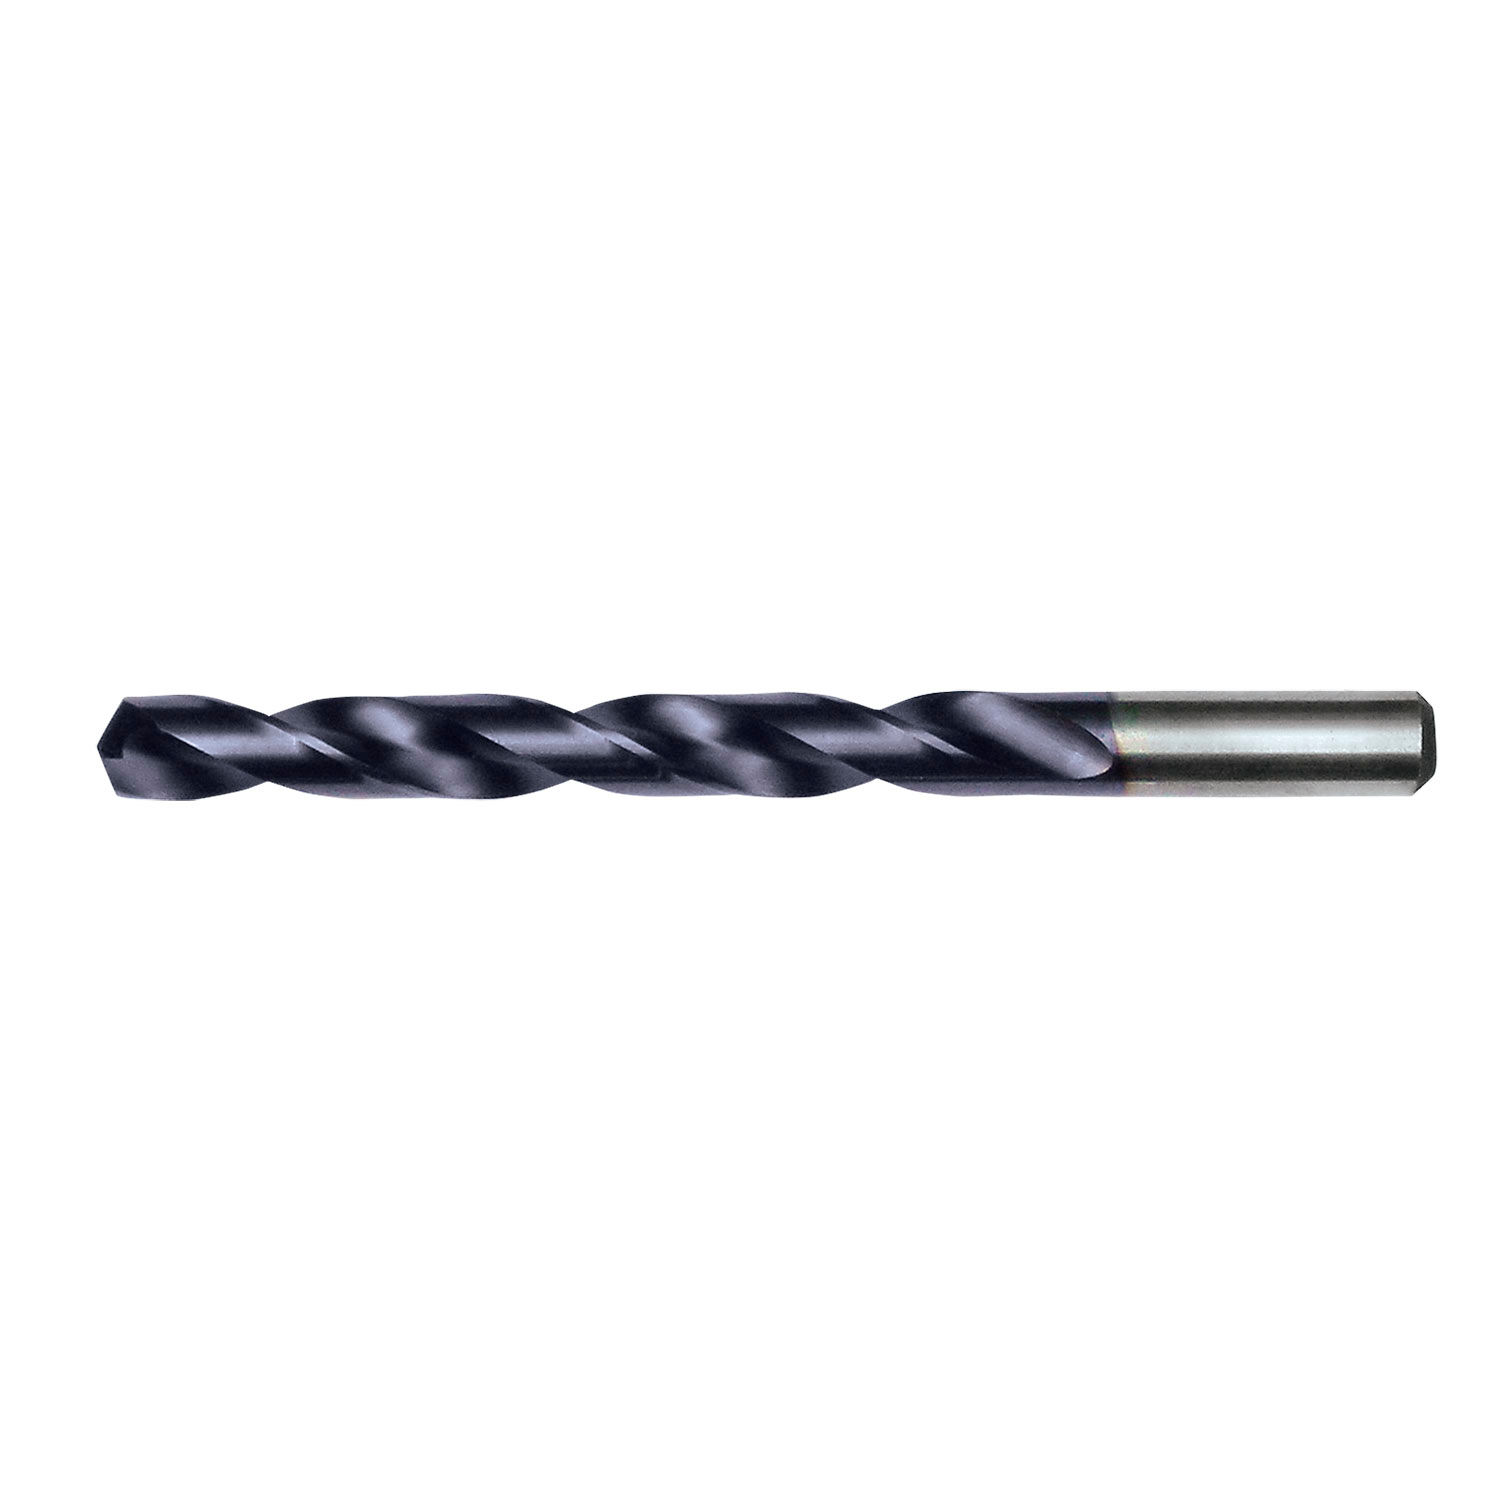 TiAlN Coated Pack of 12 Greenfield Industries Wire Size #16 Chicago Latrobe 550TA Cobalt Steel Jobber Length Drill Bit 135 Degree Split Point Round Shank